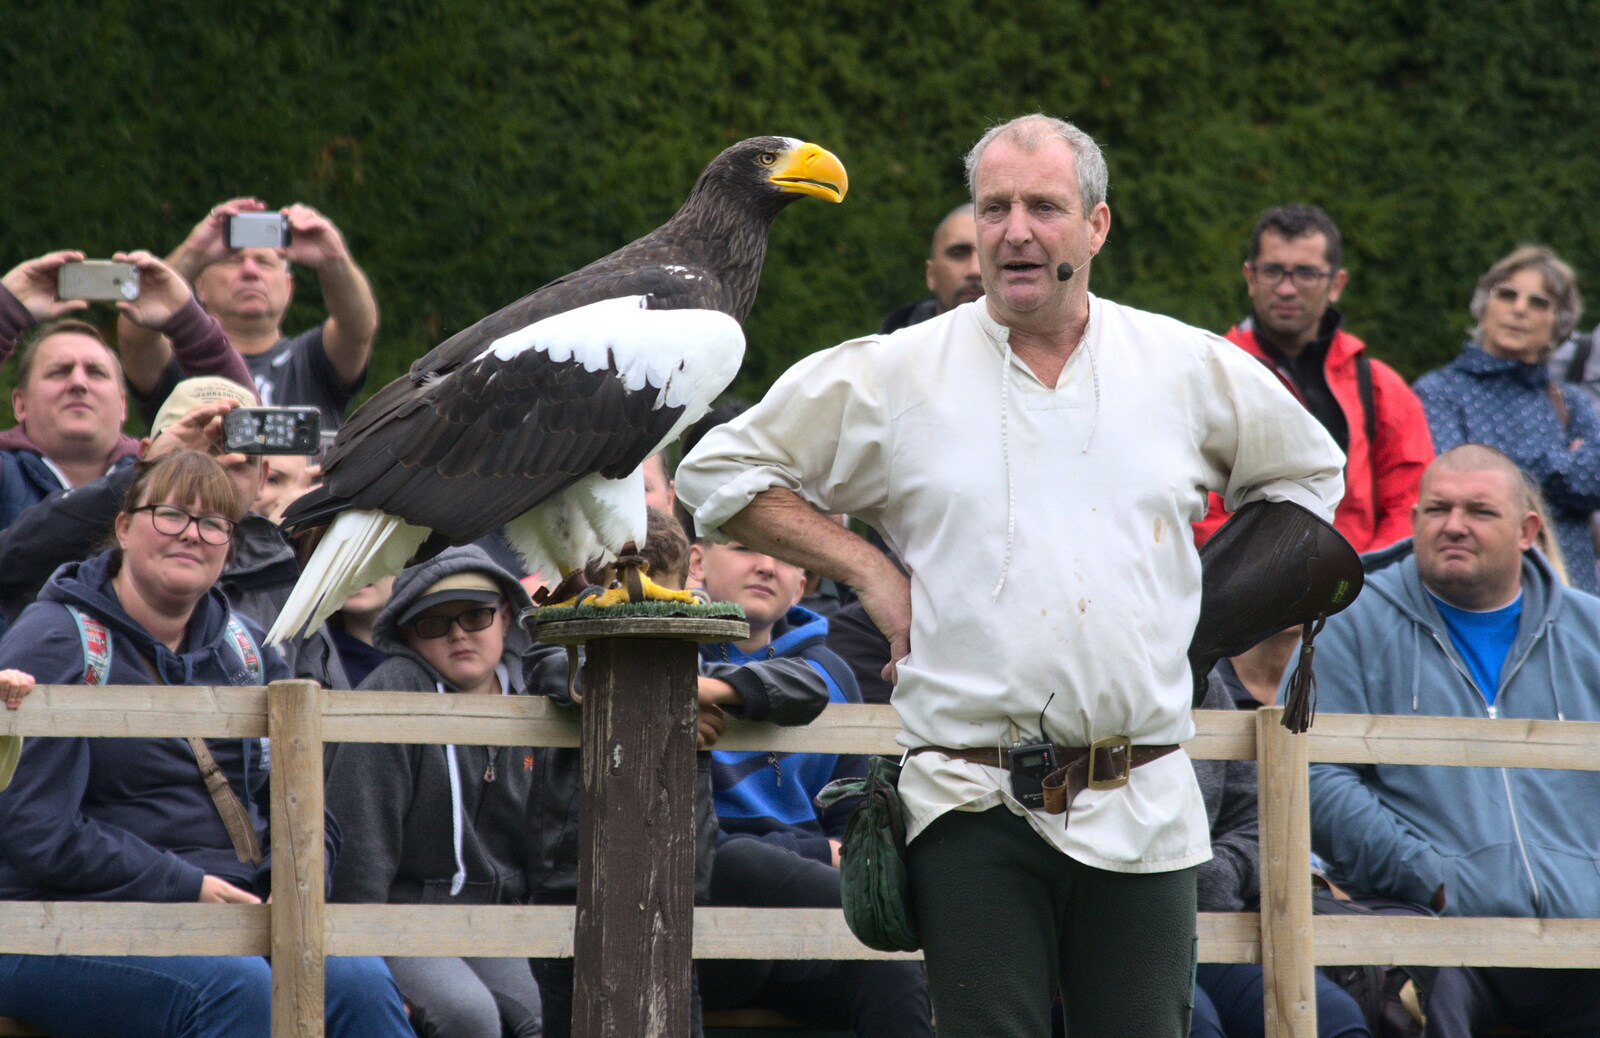 A massive fish eagle from A Day at Warwick Castle, Warwickshire - 8th September 2018